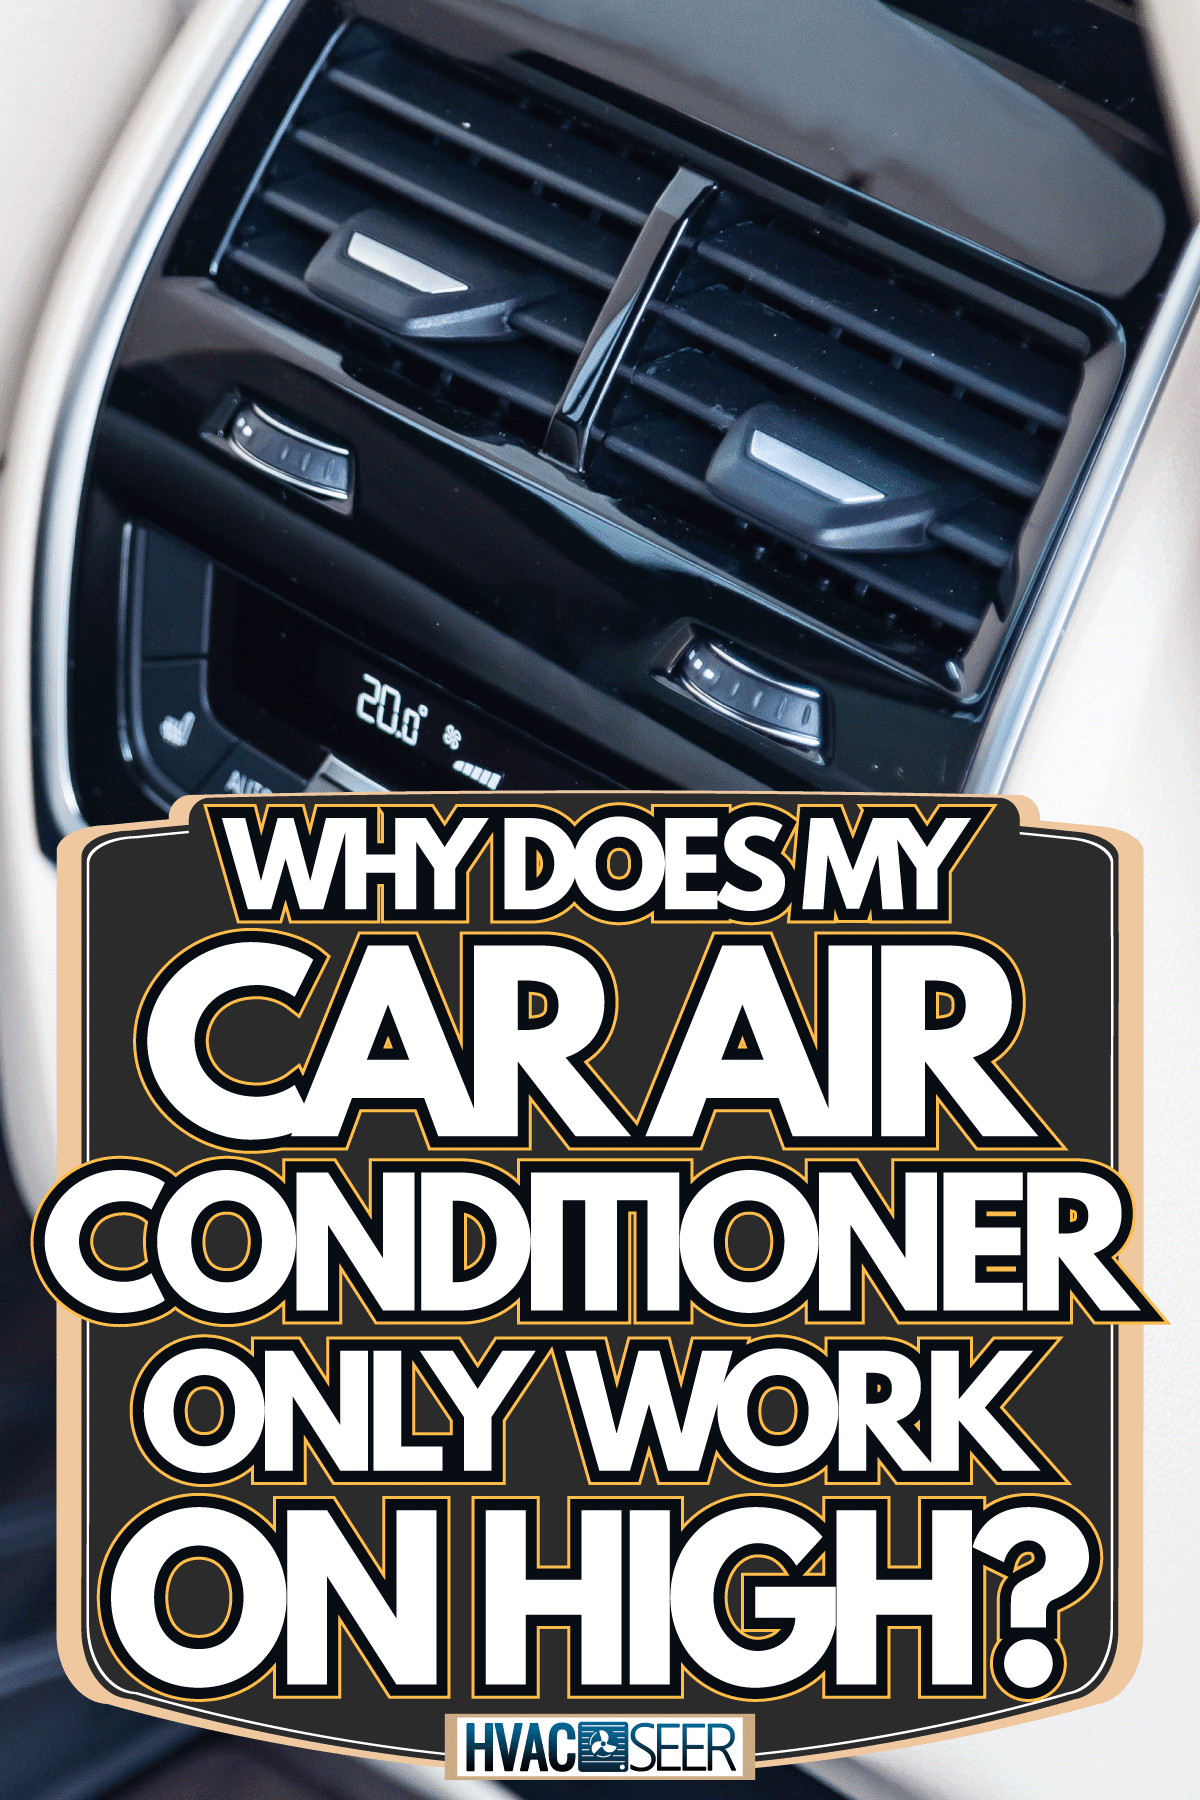 rear ventilation duct and climate-control pane, Why Does My Car Air Conditioner Only Work On High?